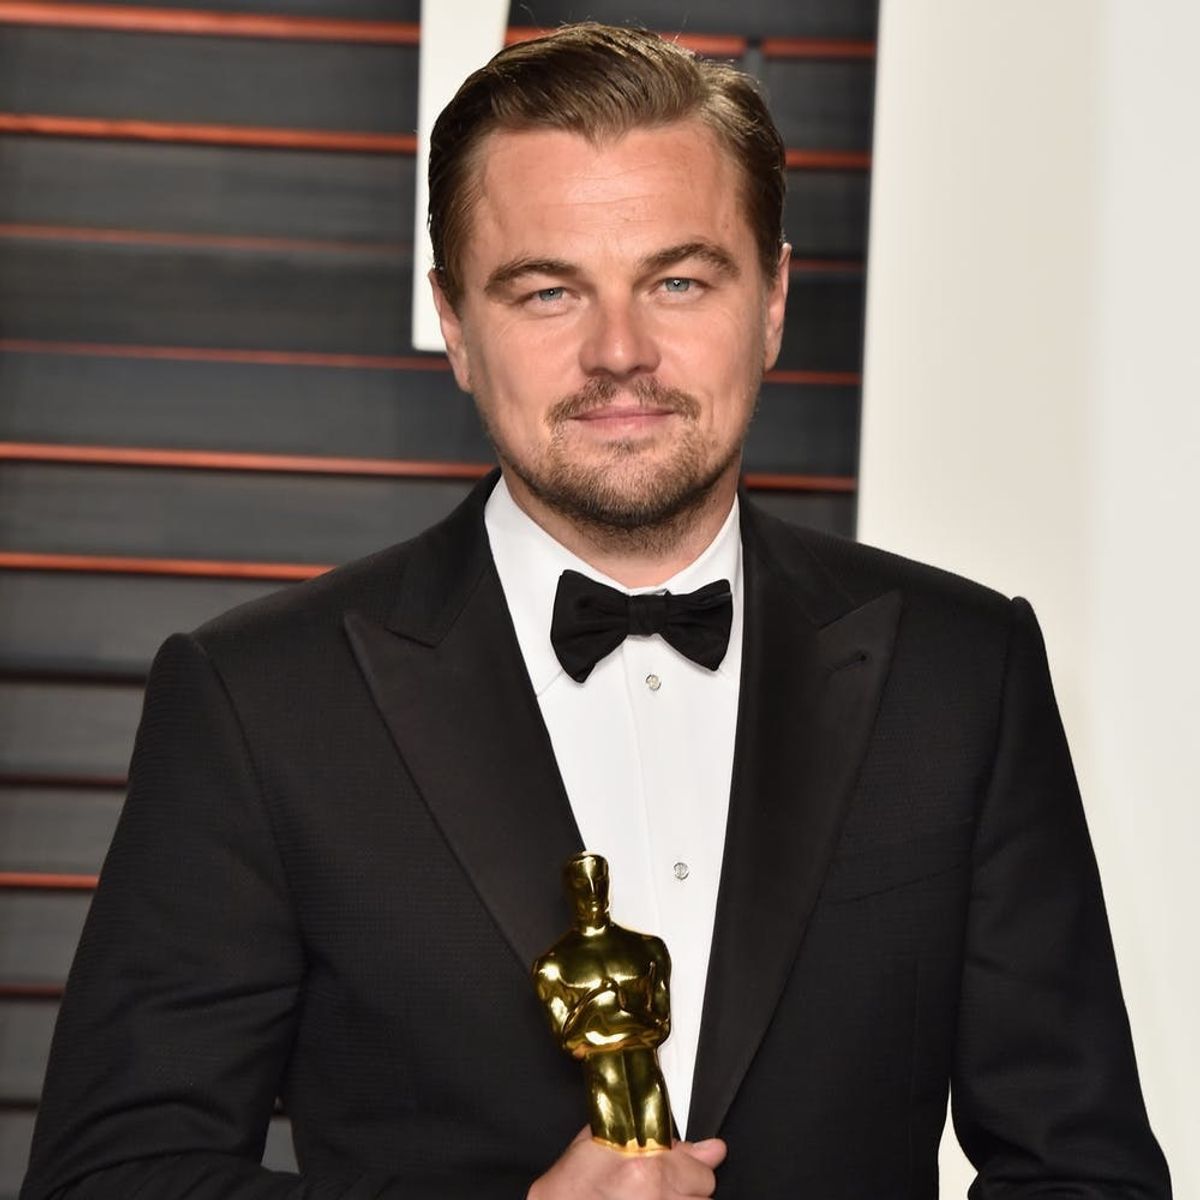 Leo Finally Won an Oscar! Here’s How to Process That